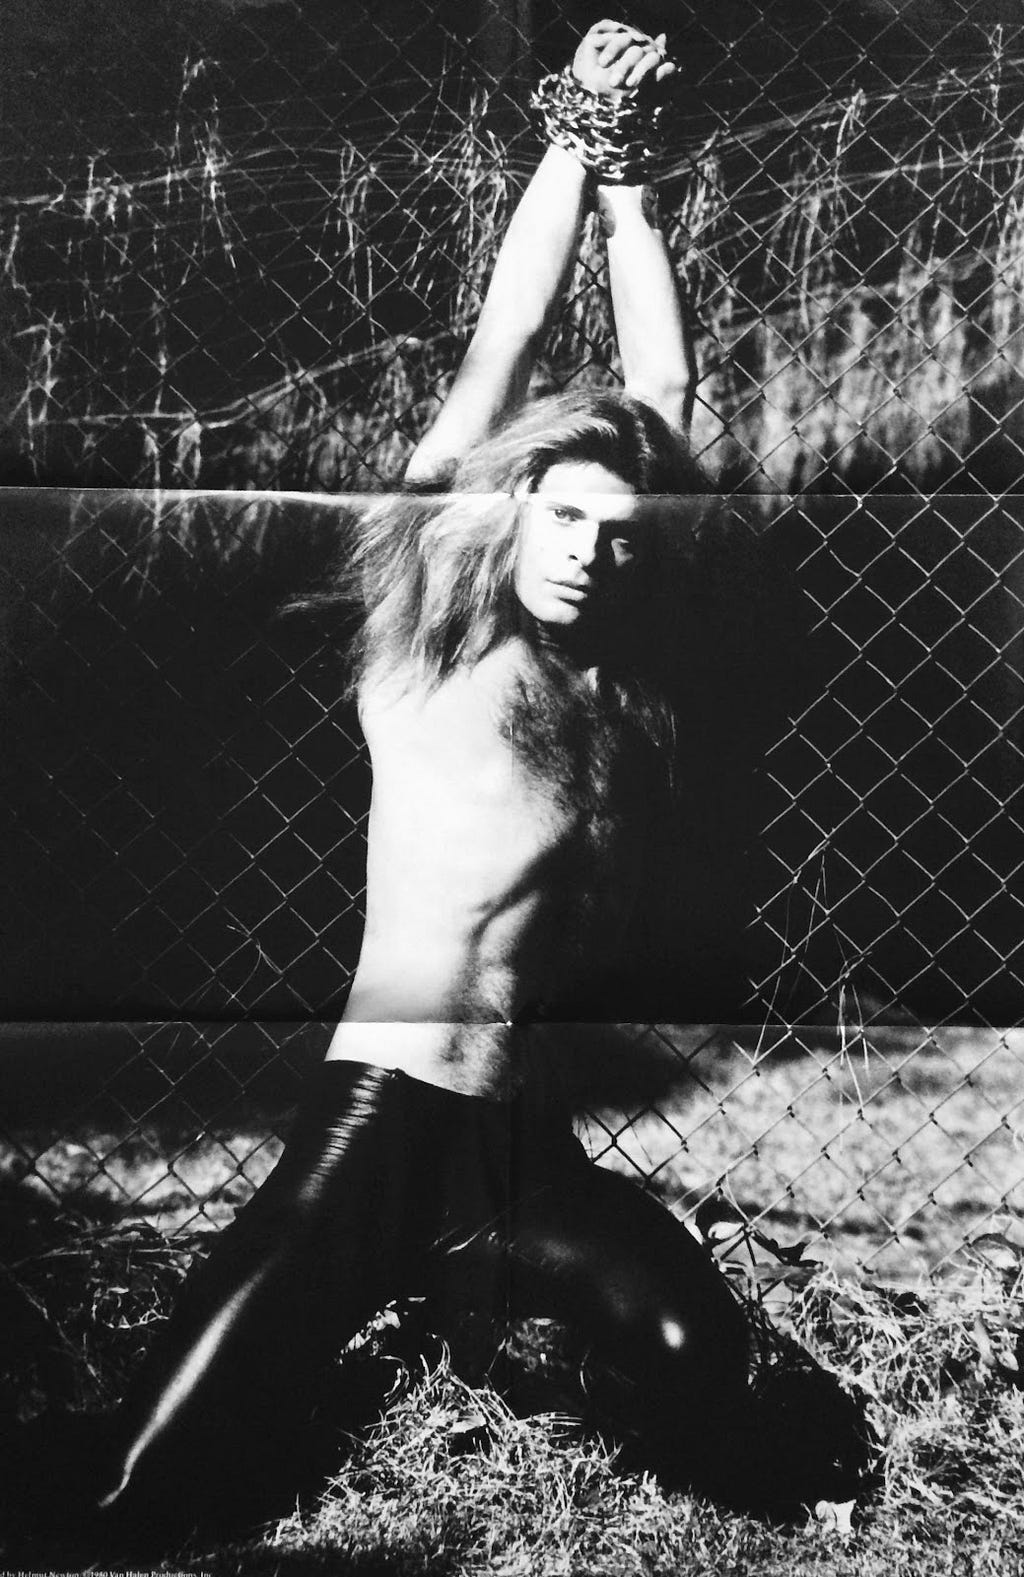 A black and white photo of David Lee Roth shirtless and tied to a wire fence. It’s been printed as a pin-up poster that was included in the Van Halen album “Women and Children First”.